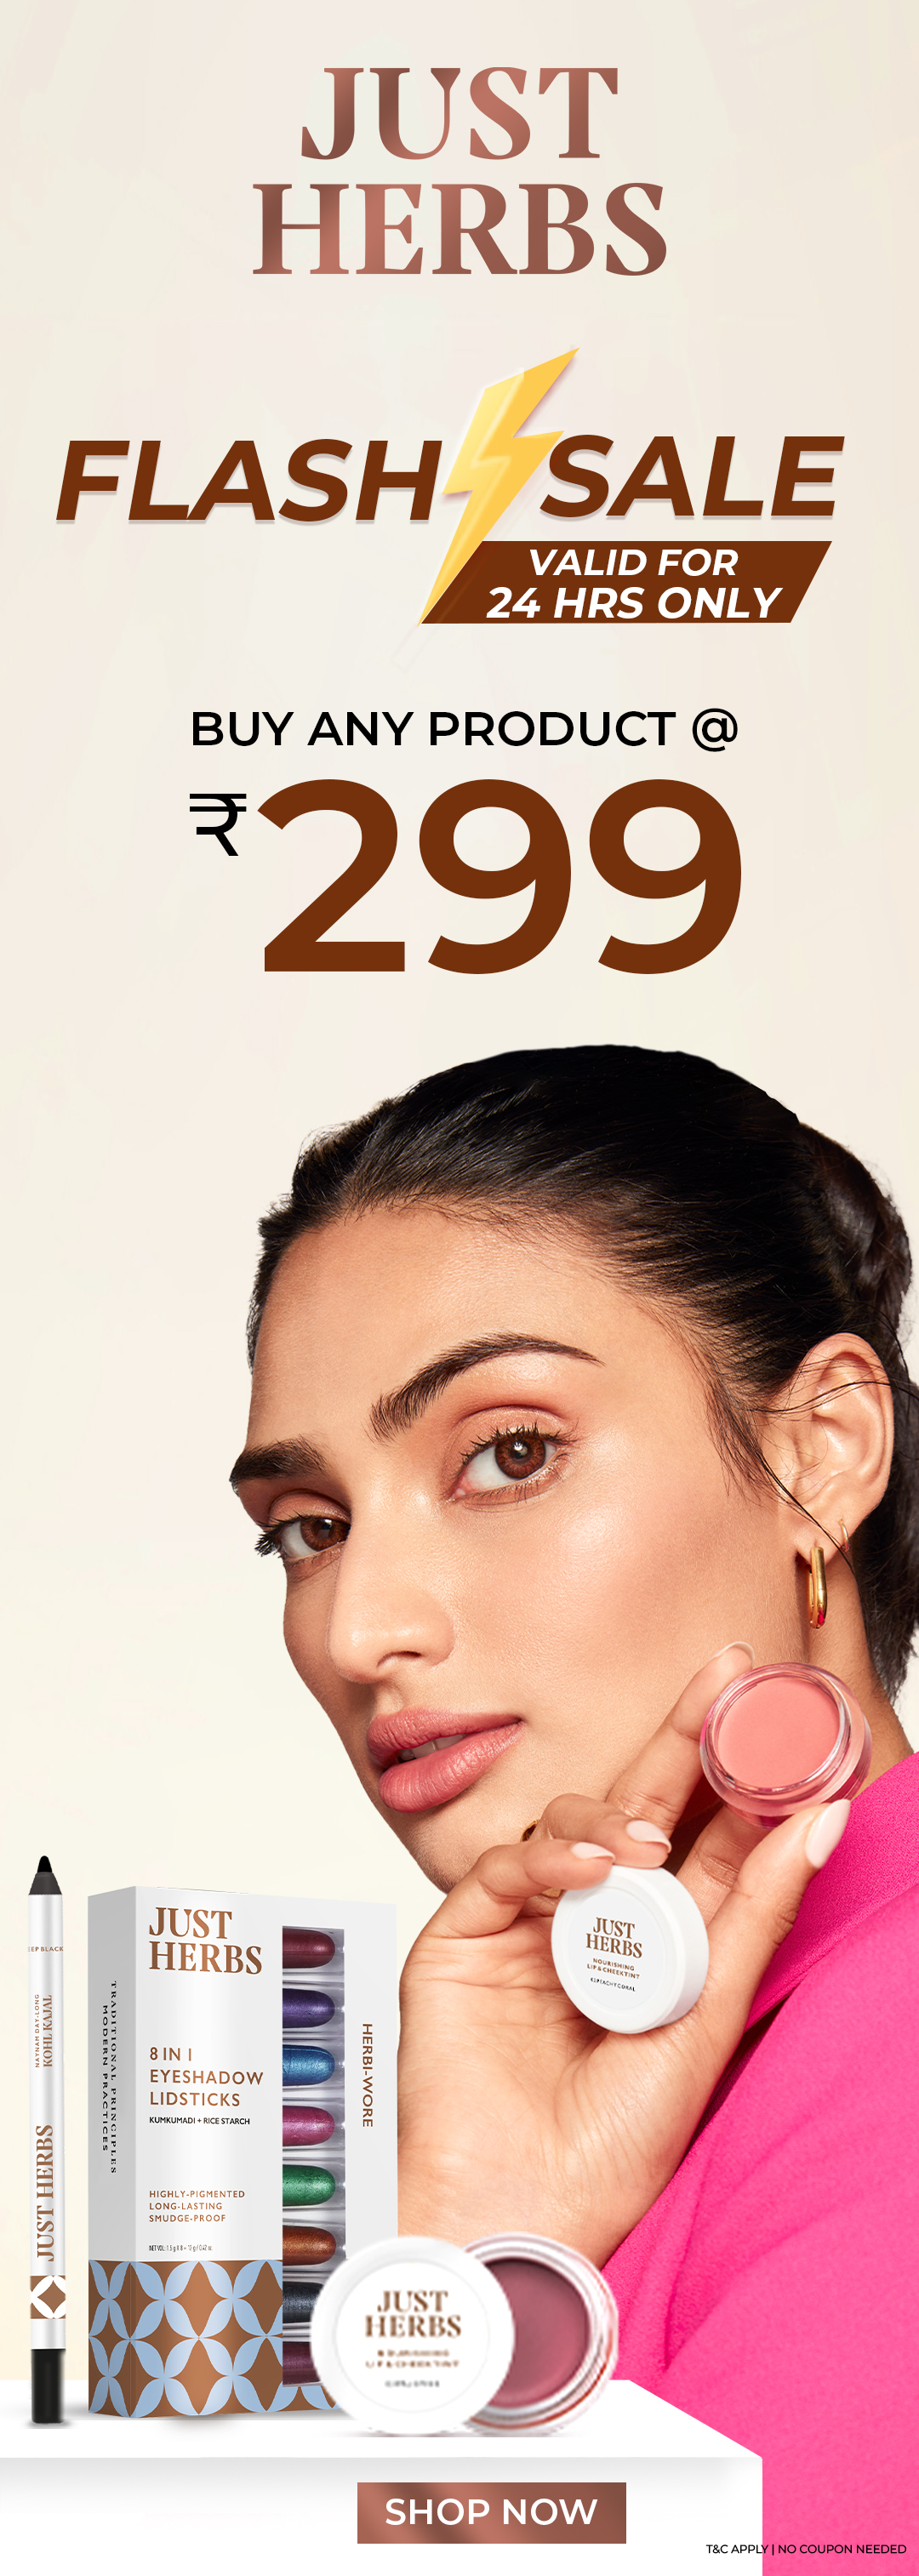 Buy Any PRODUCT at 299 - Flash Sale